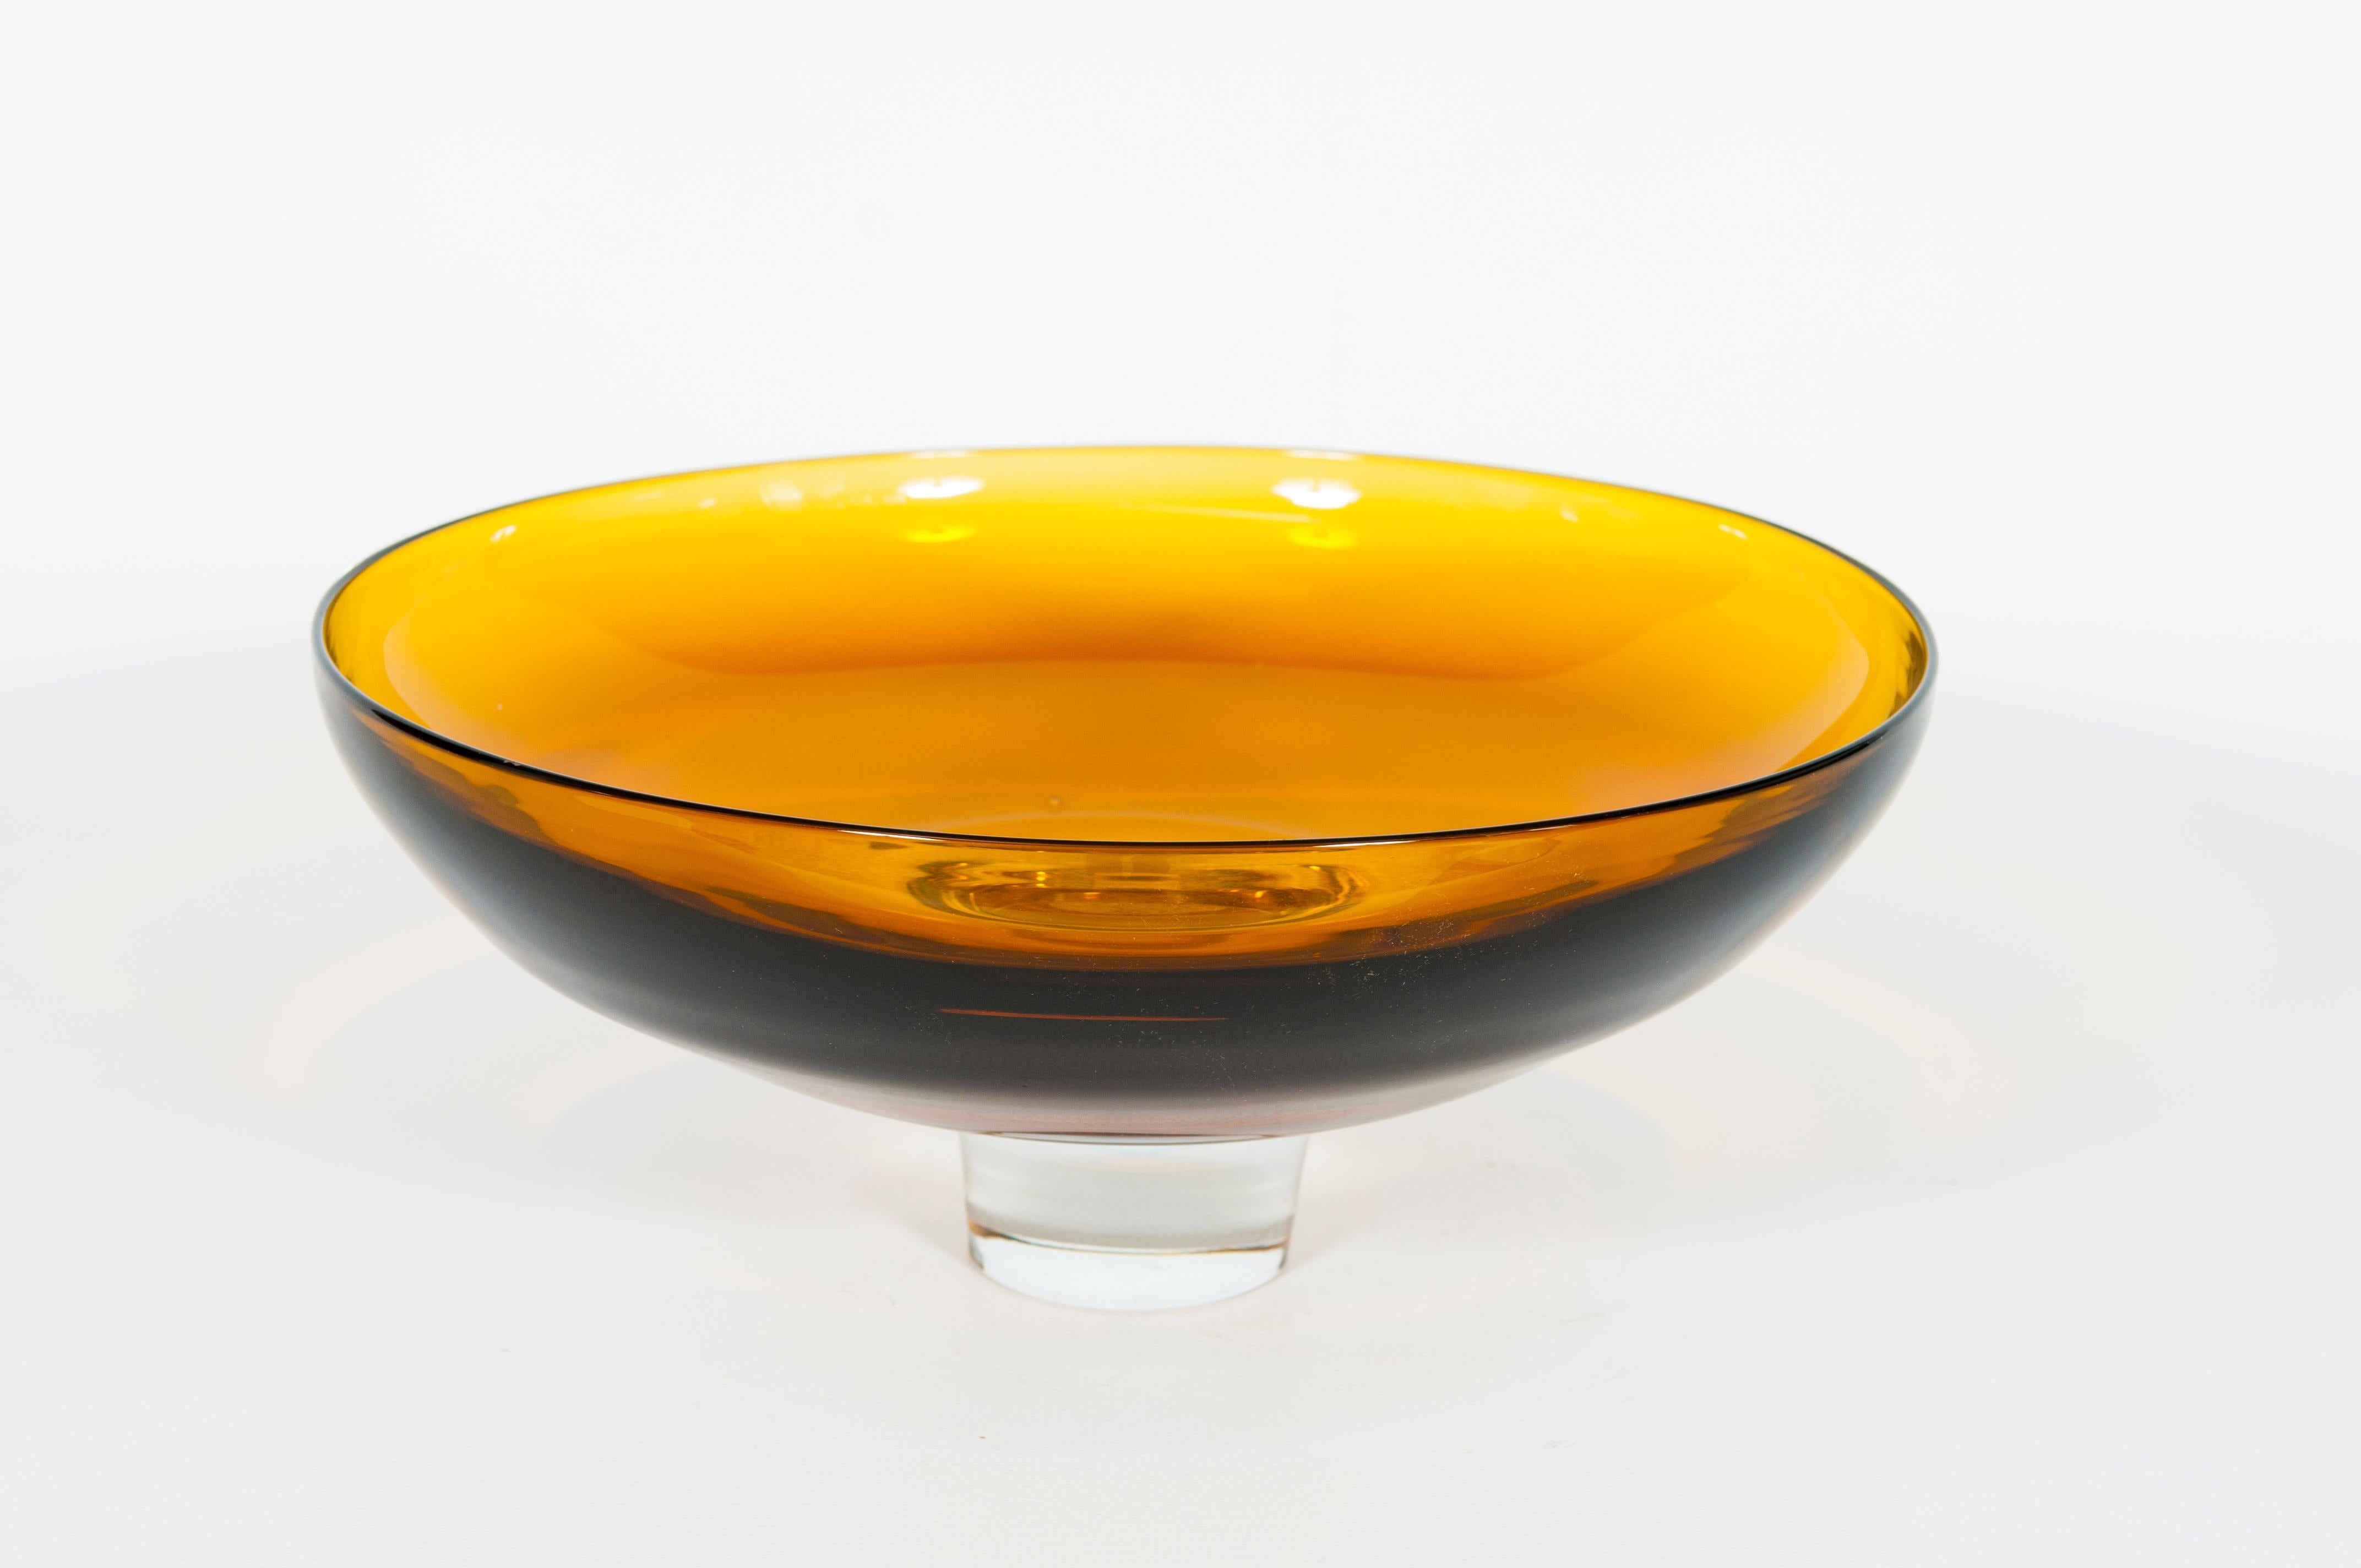 Venetian Footed Bowl in Amber Blown Murano Glass Italy 21st Century.
This bright footed bowl is a completely handcrafted work of art dating from the 2000s. Created in Venice, Italy, following the ancient technique of the Murano blown glass, it